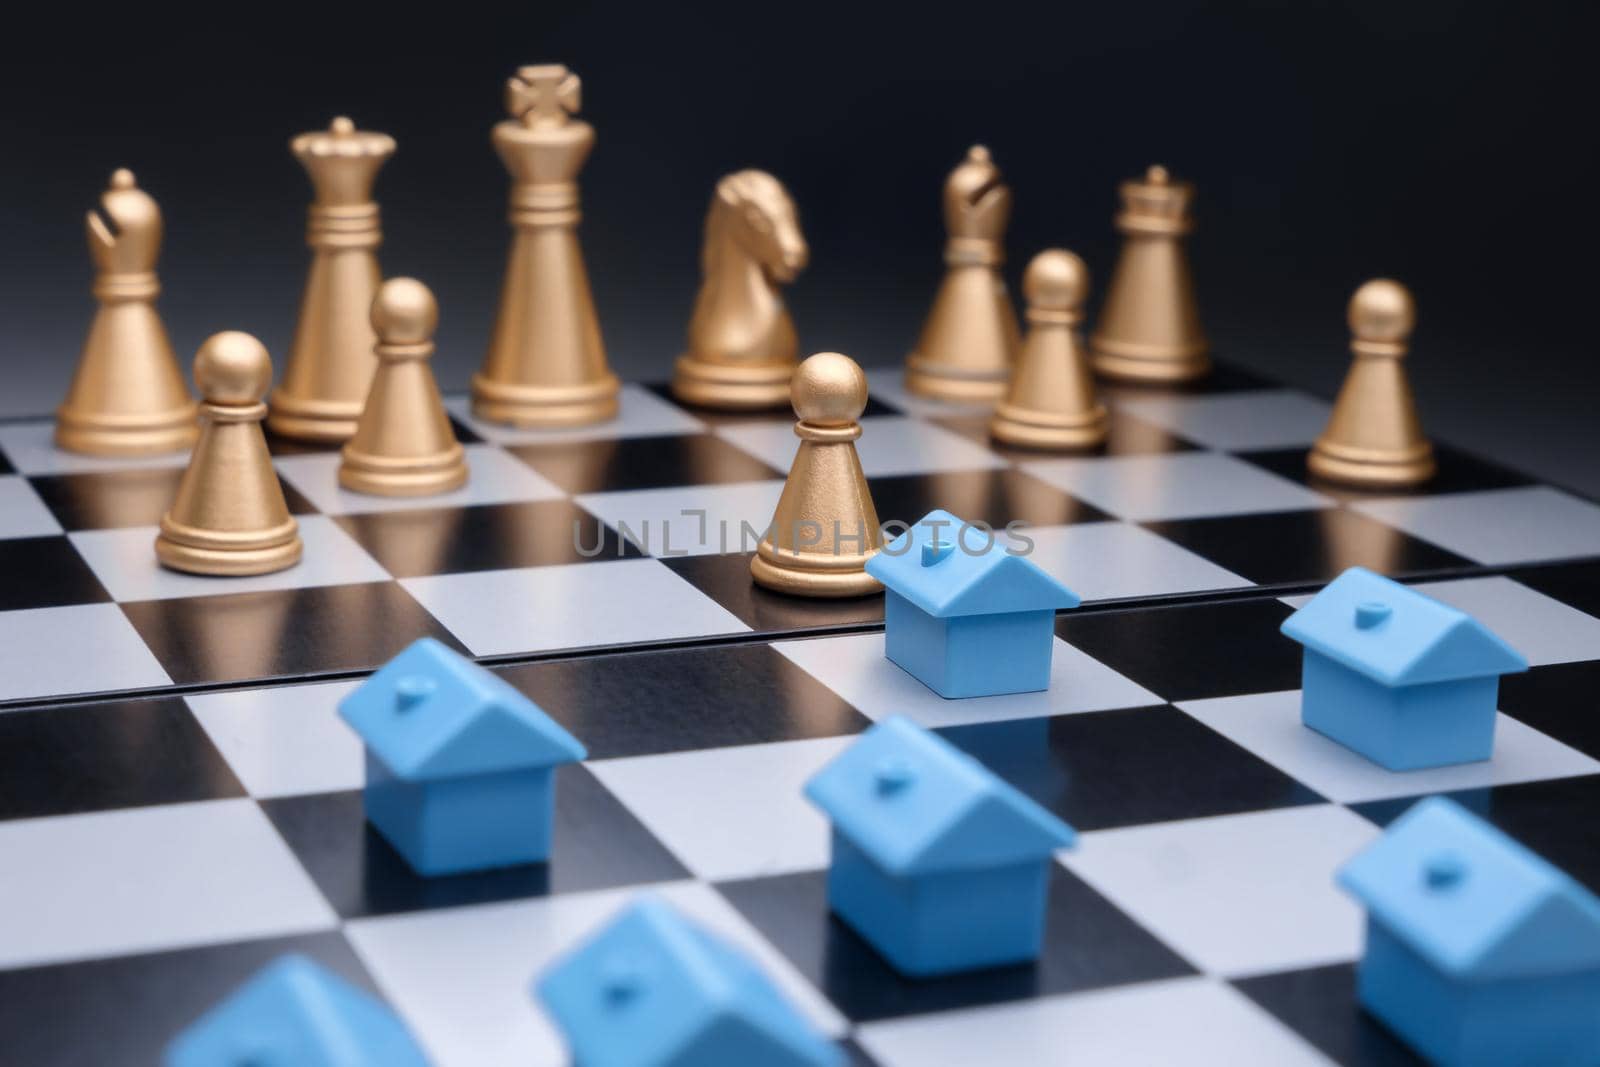 Blue miniature houses property development strategy planning on chess board. Property management. Model house real estate business strategy game chess property home mortgage marketing plan competition by synel